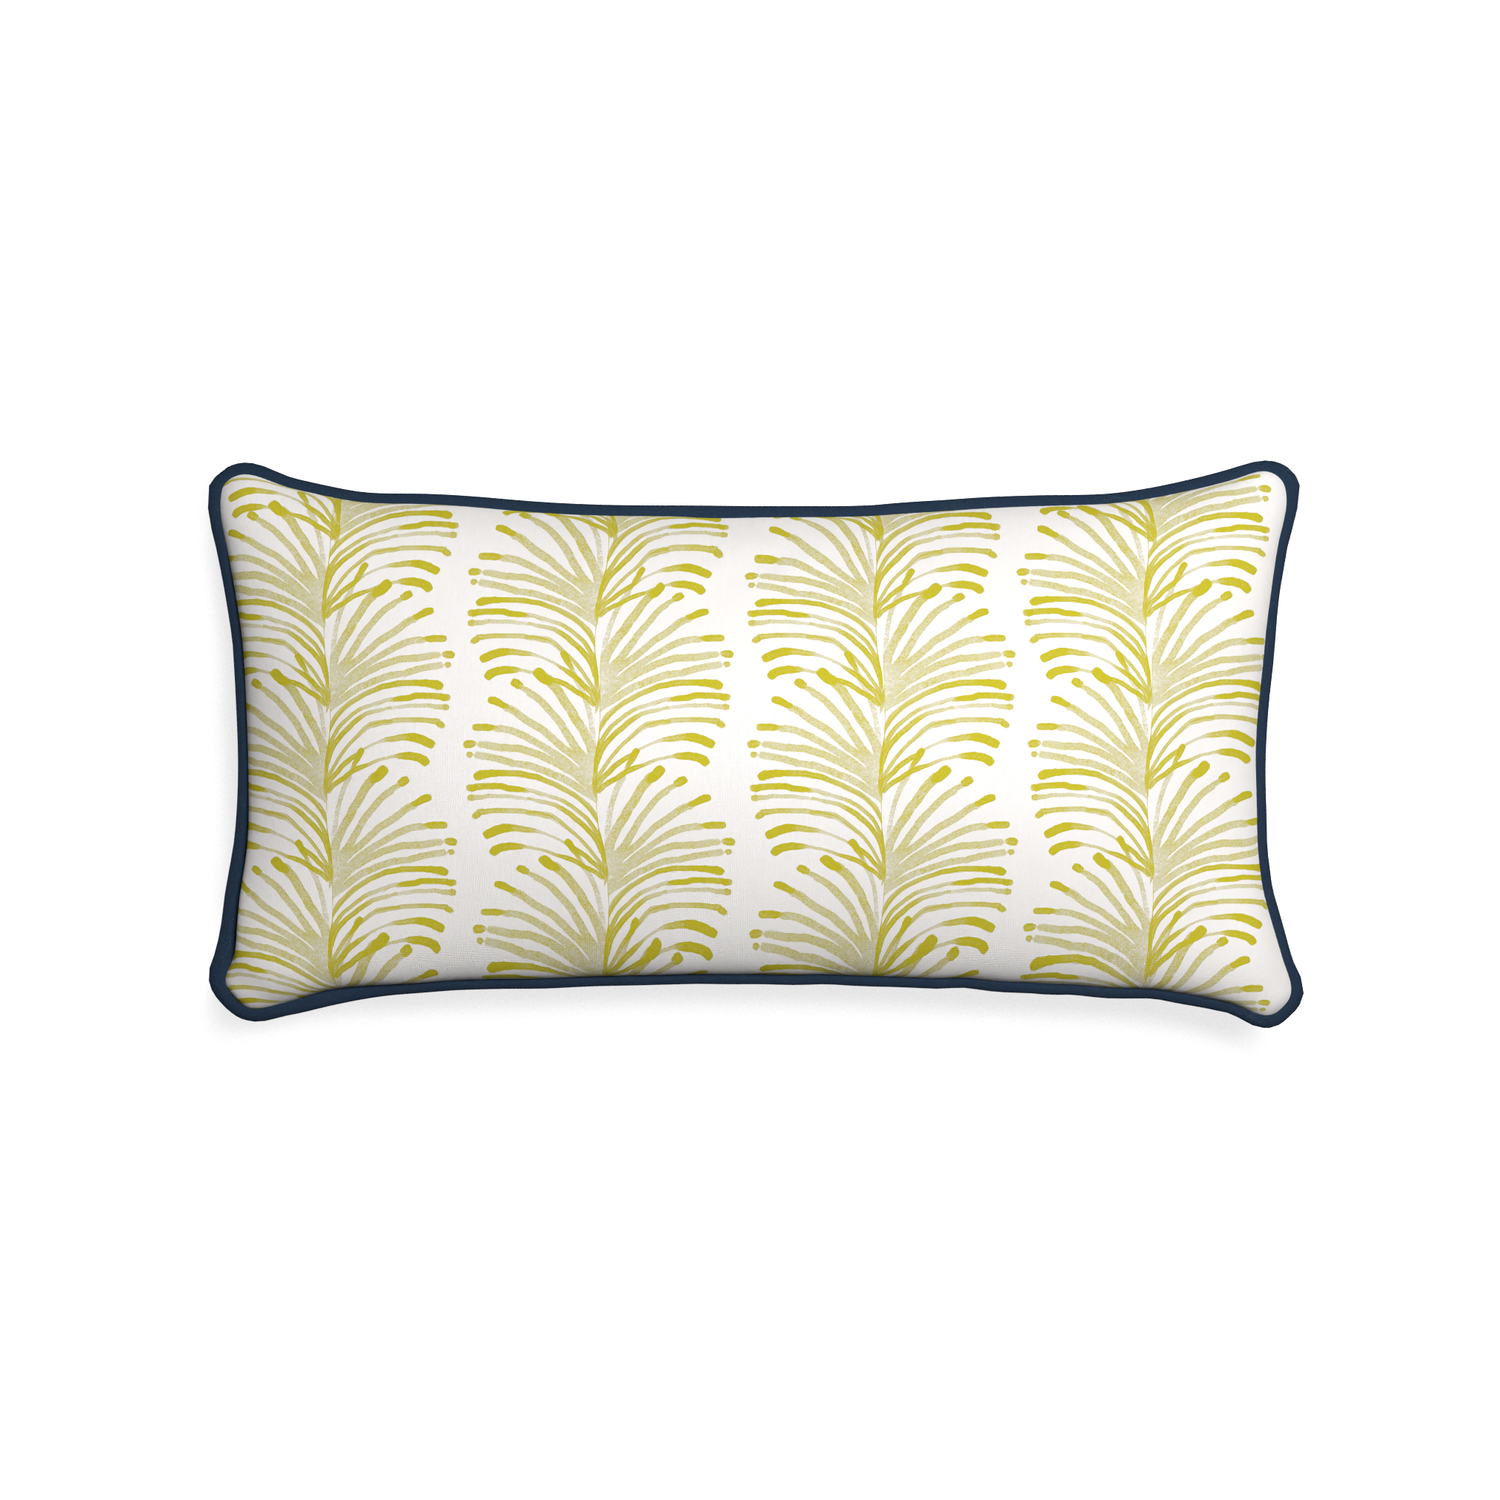 Midi-lumbar emma chartreuse custom yellow stripe chartreusepillow with c piping on white background